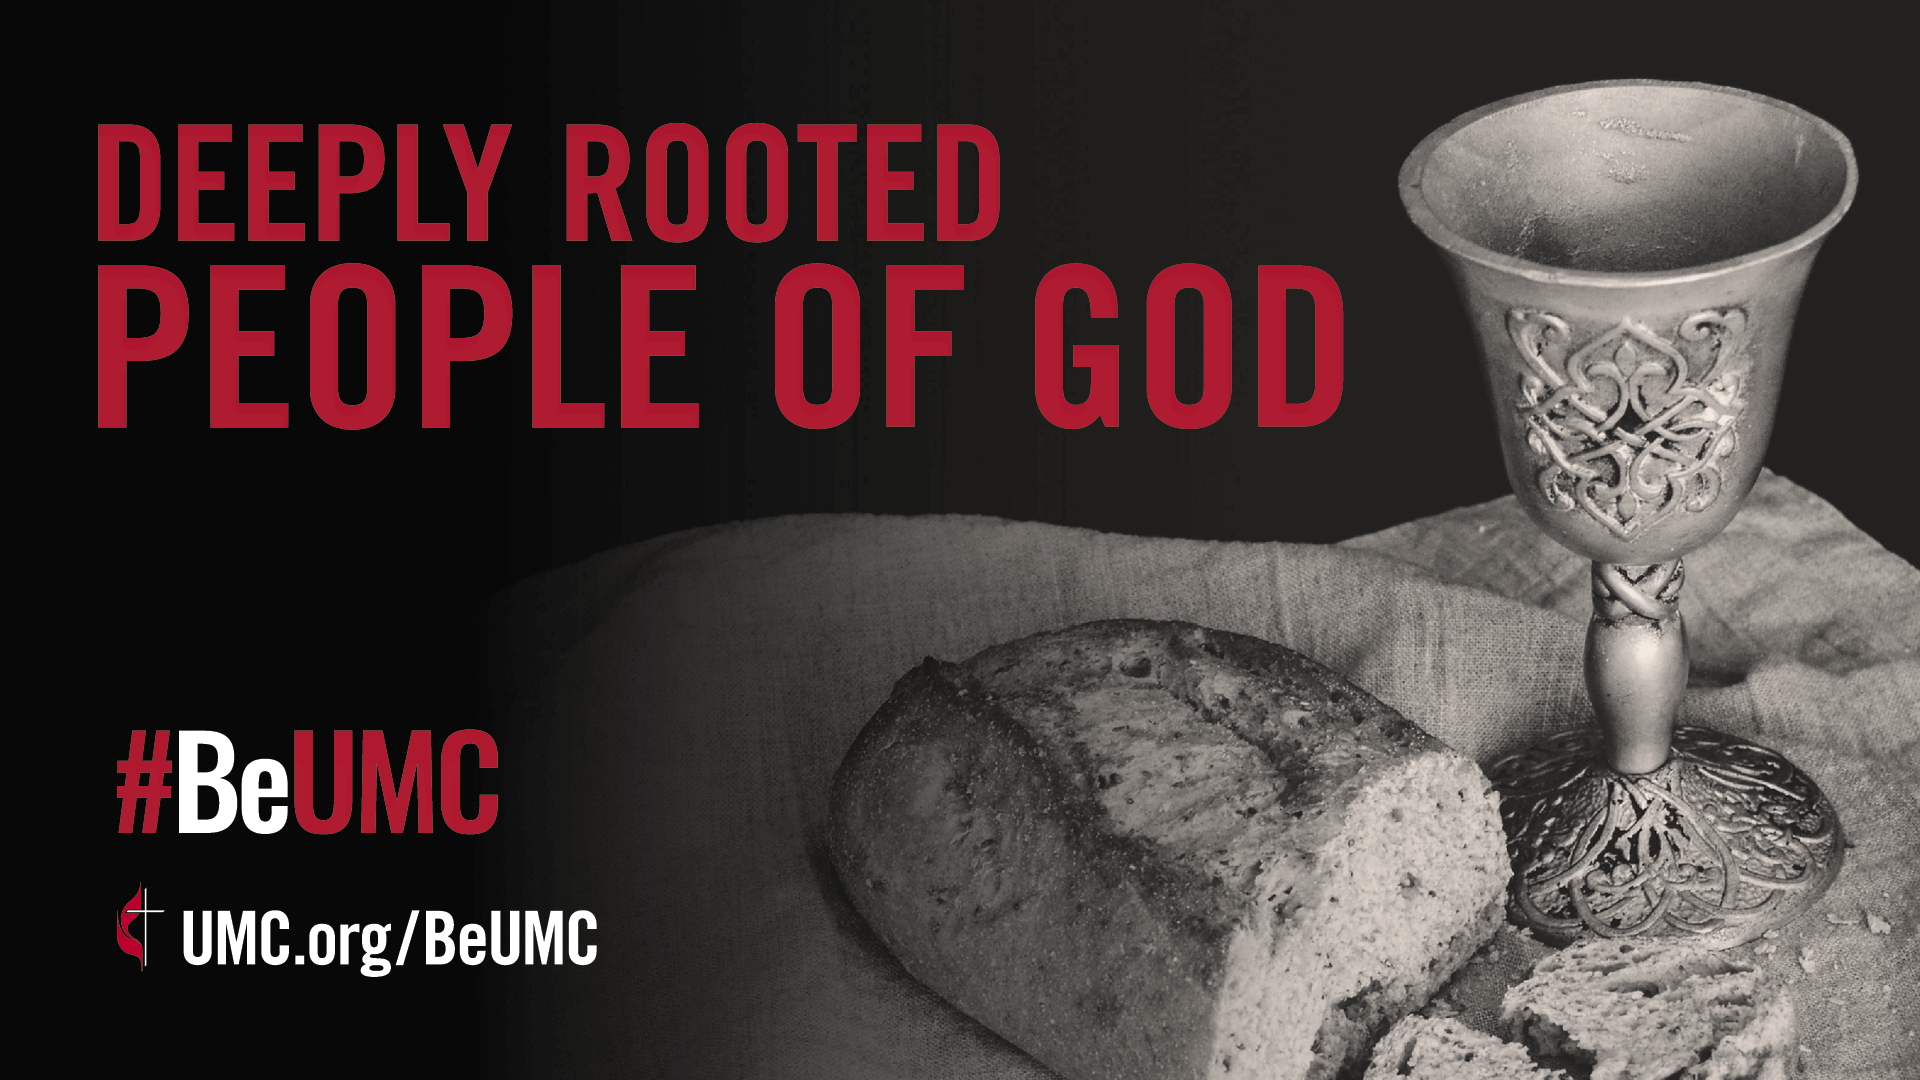 The #BeUMC campaign reminds us of who we are at our best. As people of God called The United Methodist Church, we’re faithful followers of Jesus seeking to make the world a better place. We are deeply rooted, finding commonality in our rich history, sacraments and values. (worship graphic, communion image, English).